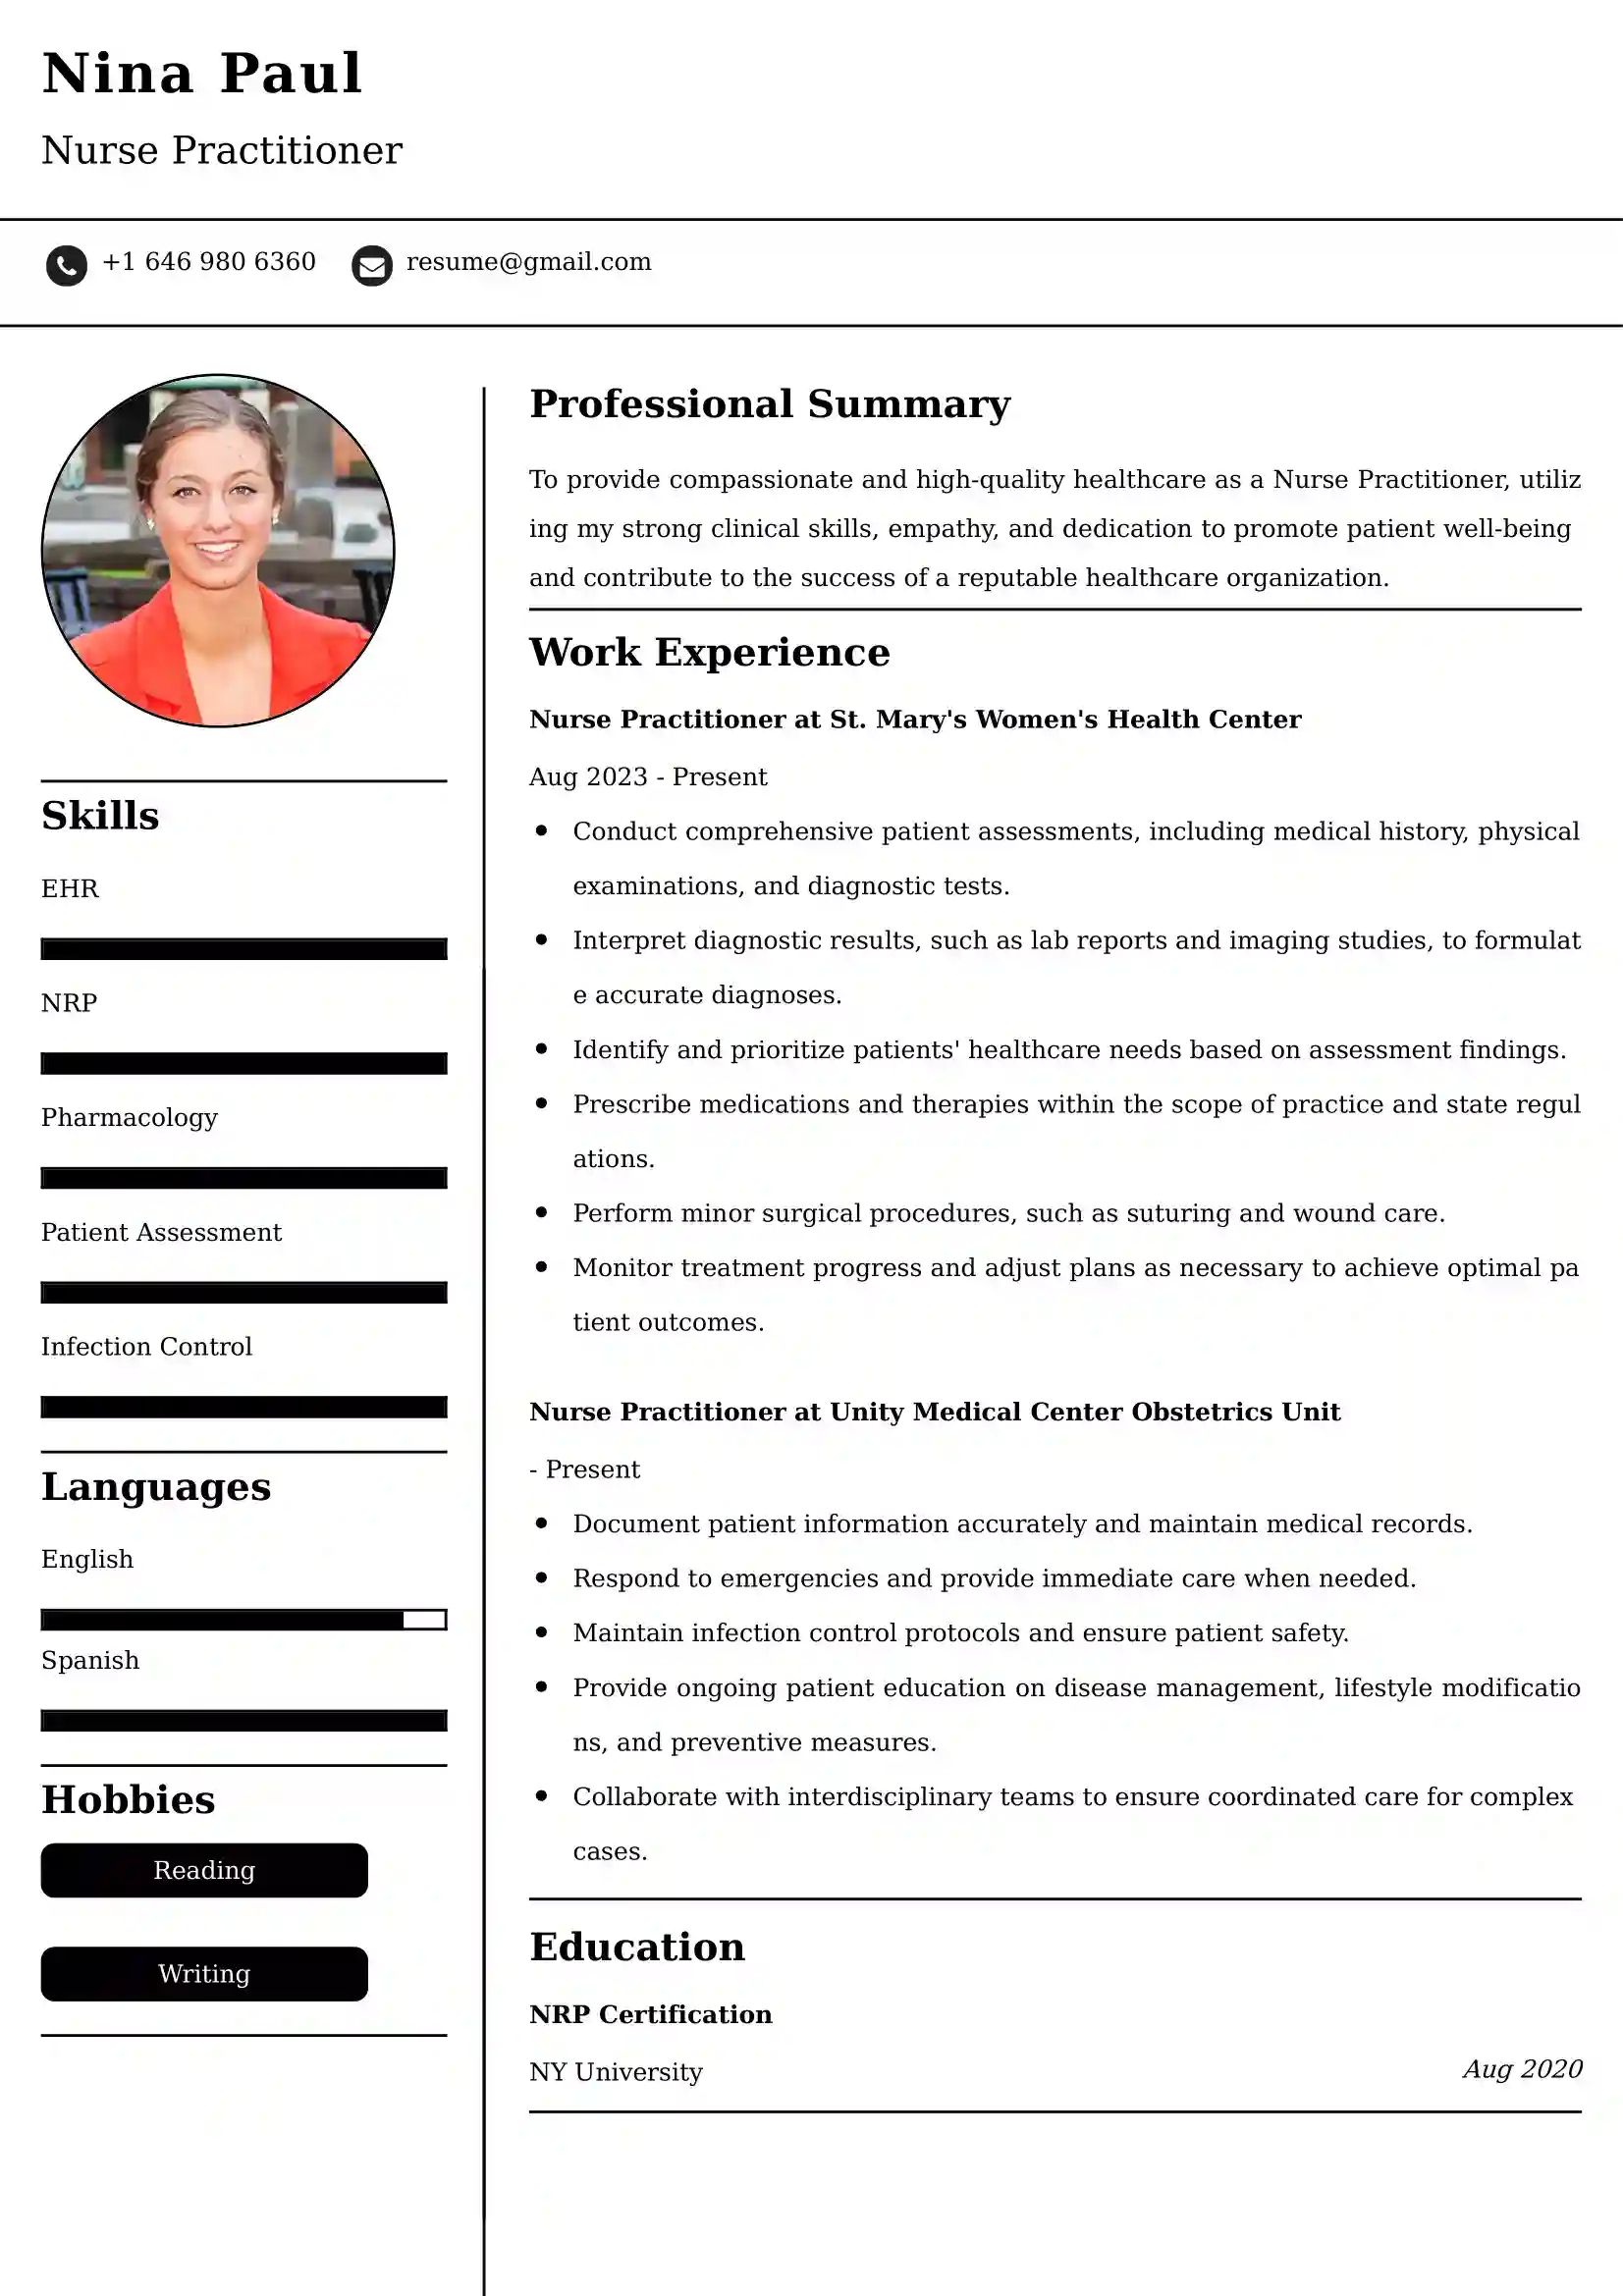 Nurse Practitioner Resume Examples - UK Format, Latest Template.